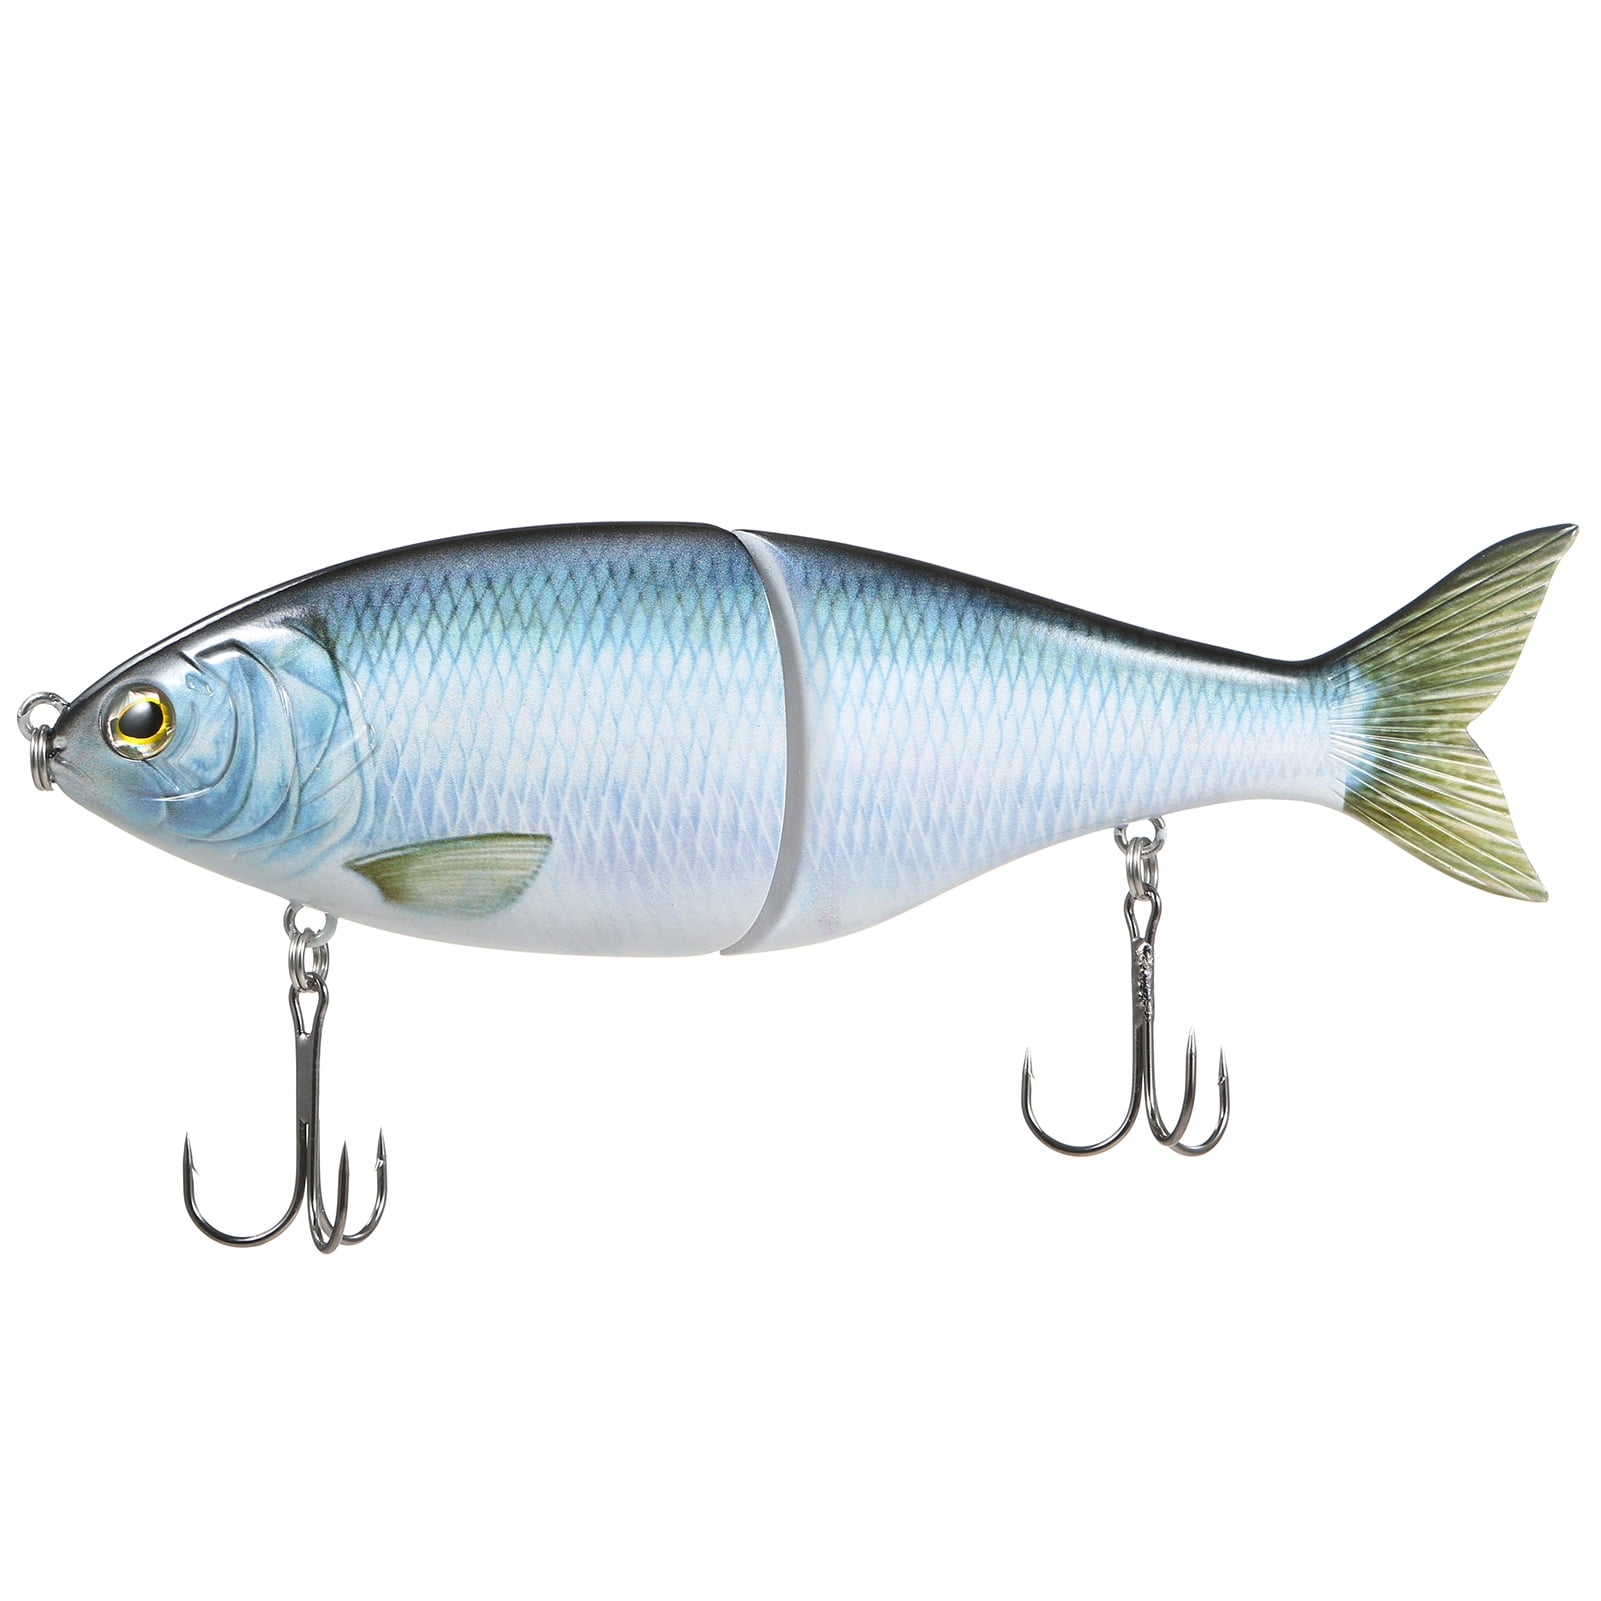 Taruor TARUOR Glider Fishing Lures 178mm Glide Bait Jointed